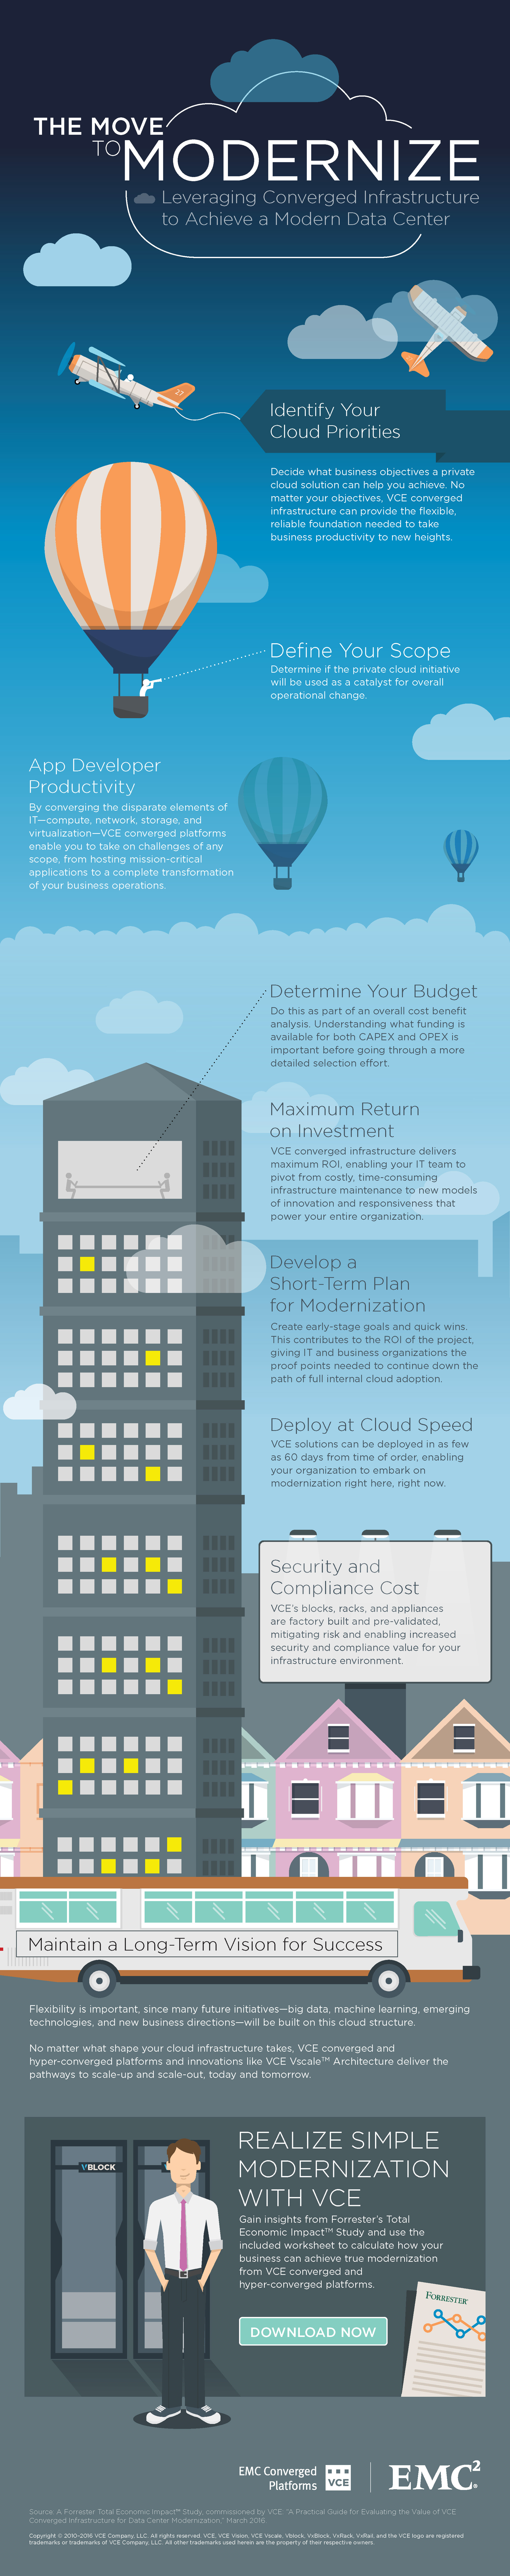 VCE Forrester Infographic